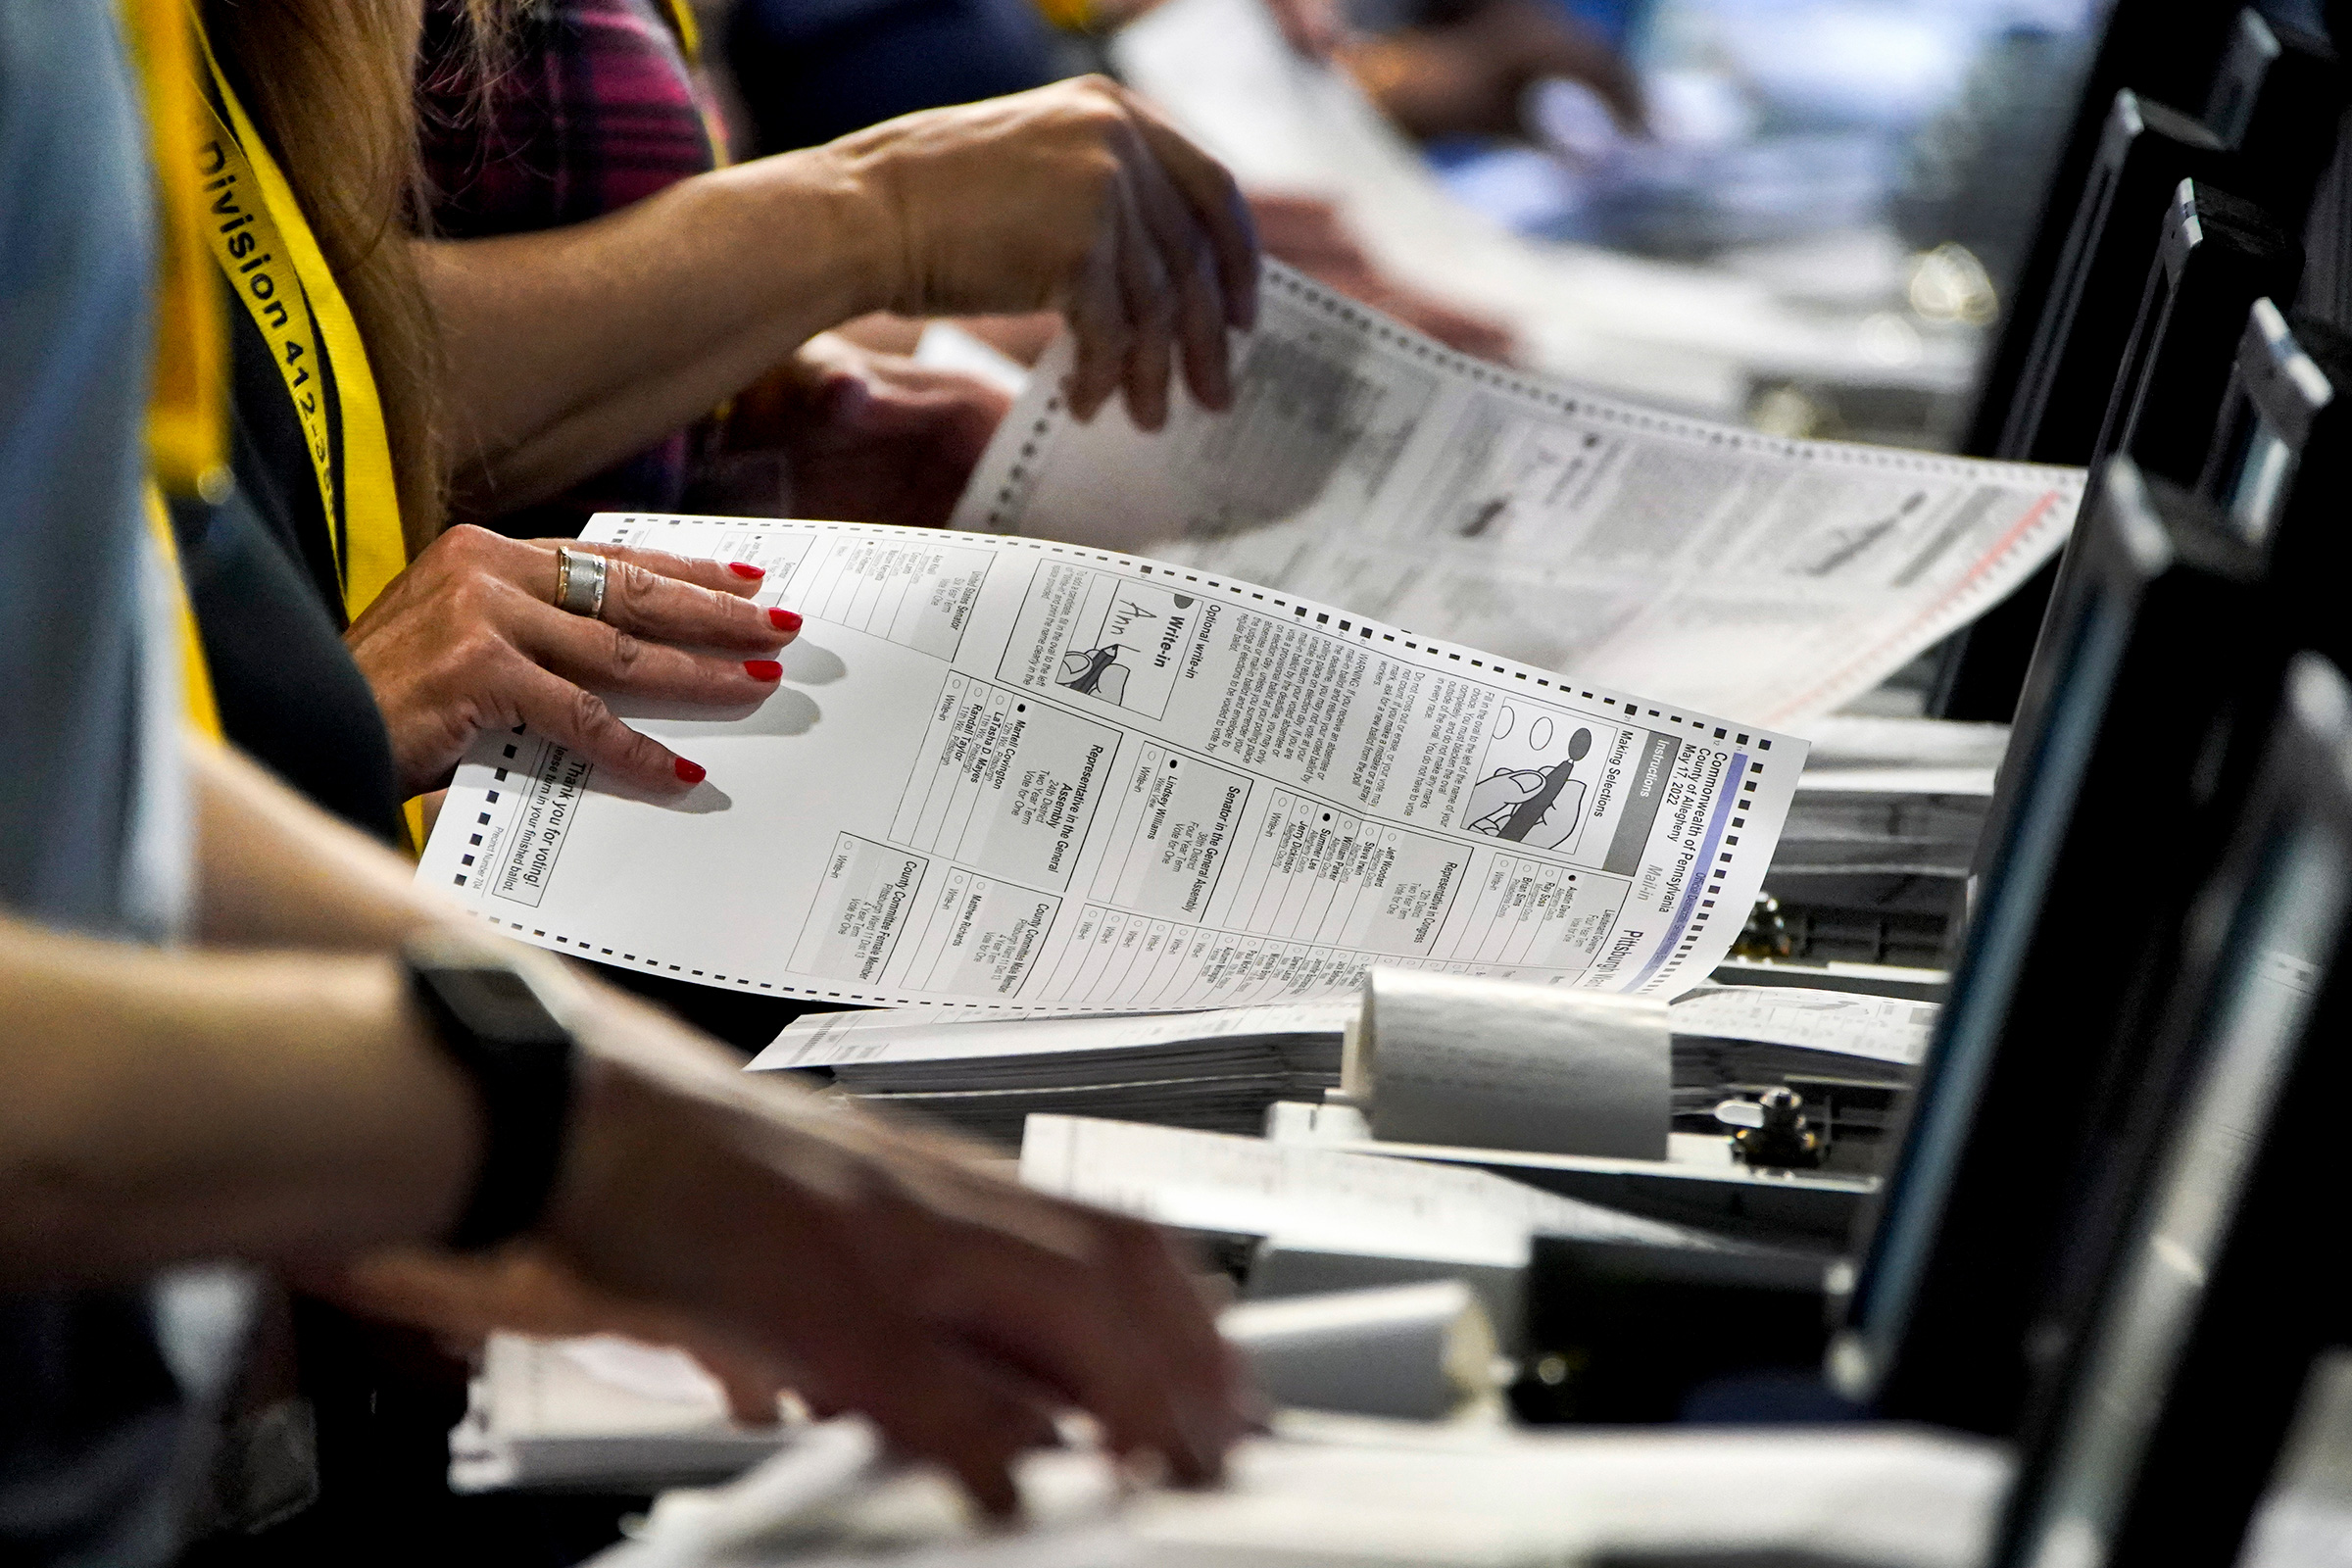 Election workers perform a recount of ballots from the Pennsylvania primary election at the Allegheny County Election Division warehouse in Pittsburgh, Penn., on June 1, 2022. (Gene J. Puskar—AP)